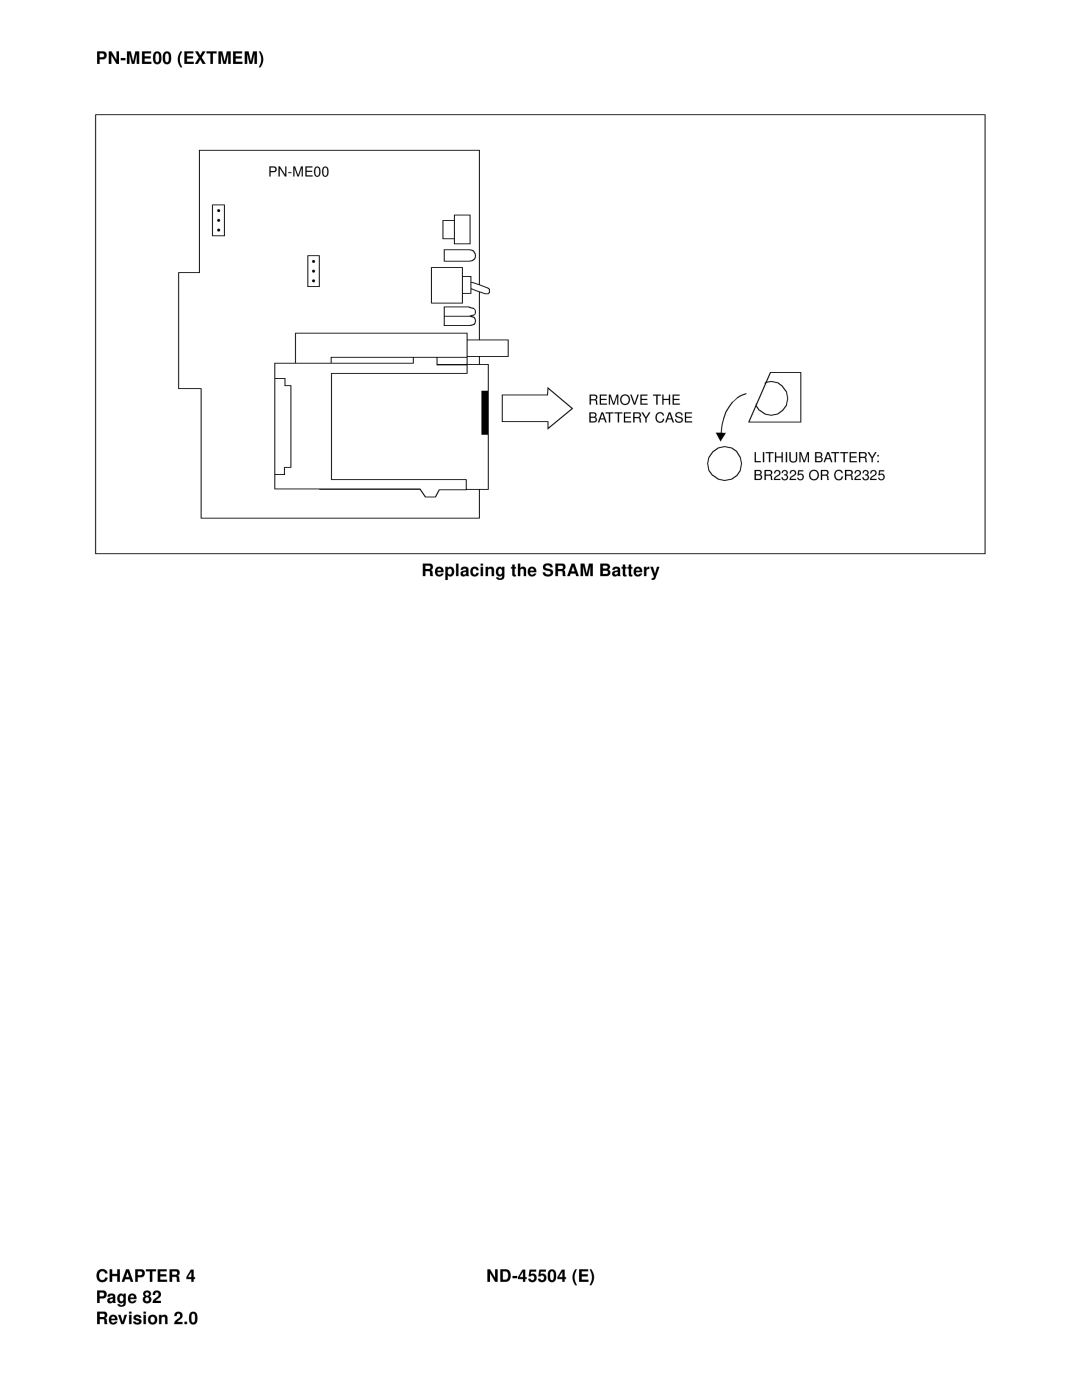 NEC 2000 IVS manual PN-ME00EXTMEM, Replacing the SRAM Battery, Chapter, ND-45504E, Page Revision, BR2325 OR CR2325 